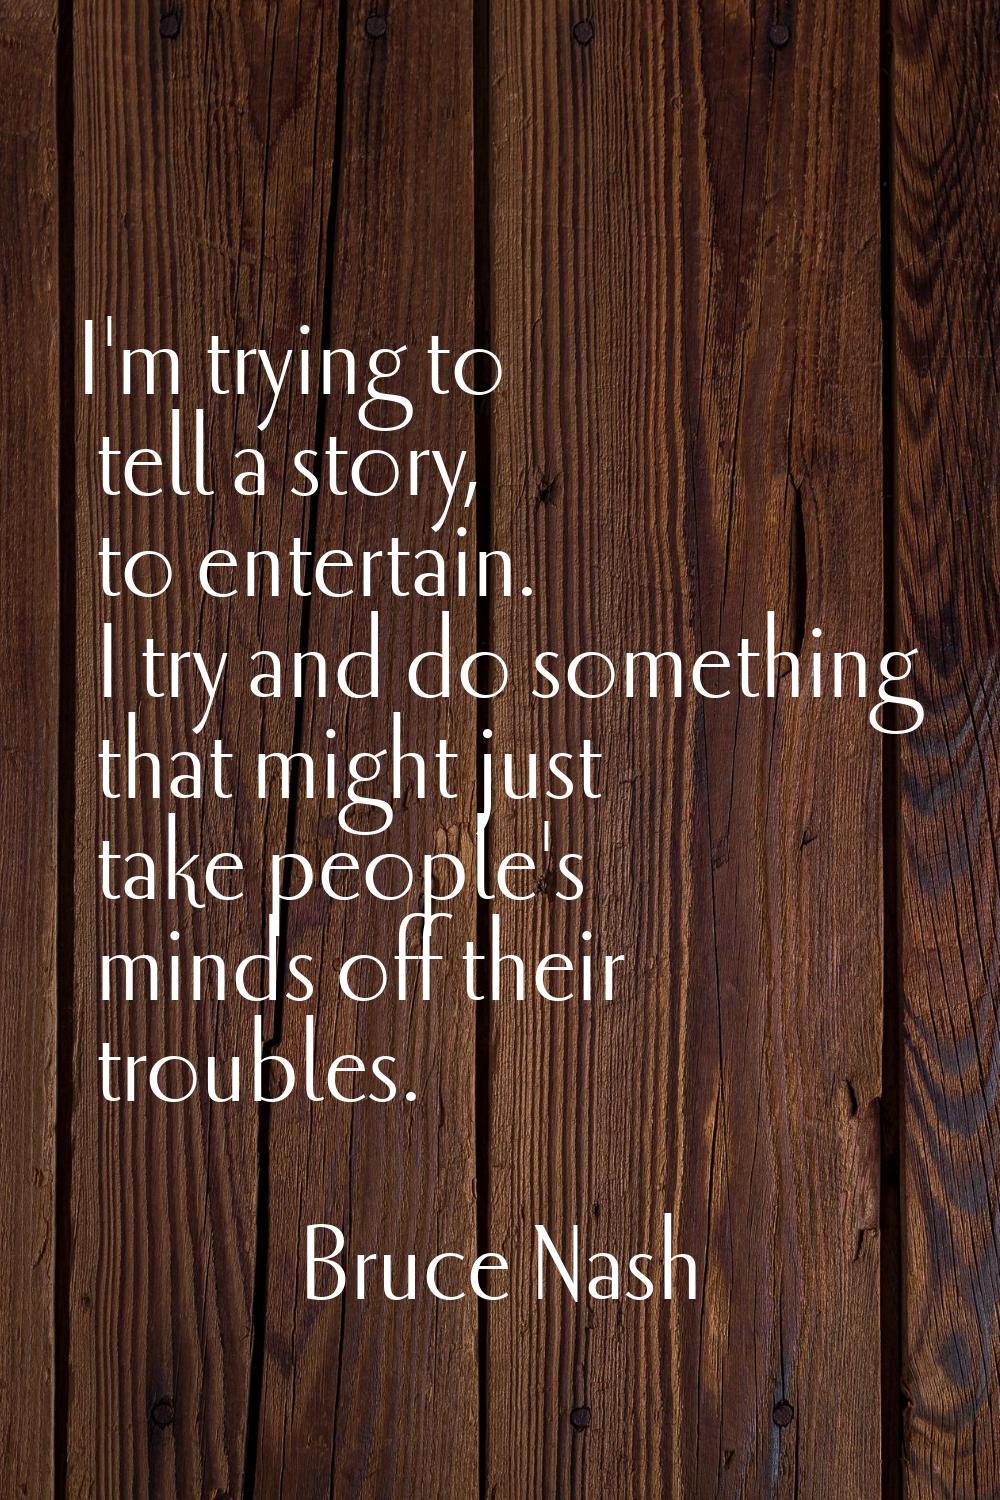 I'm trying to tell a story, to entertain. I try and do something that might just take people's mind